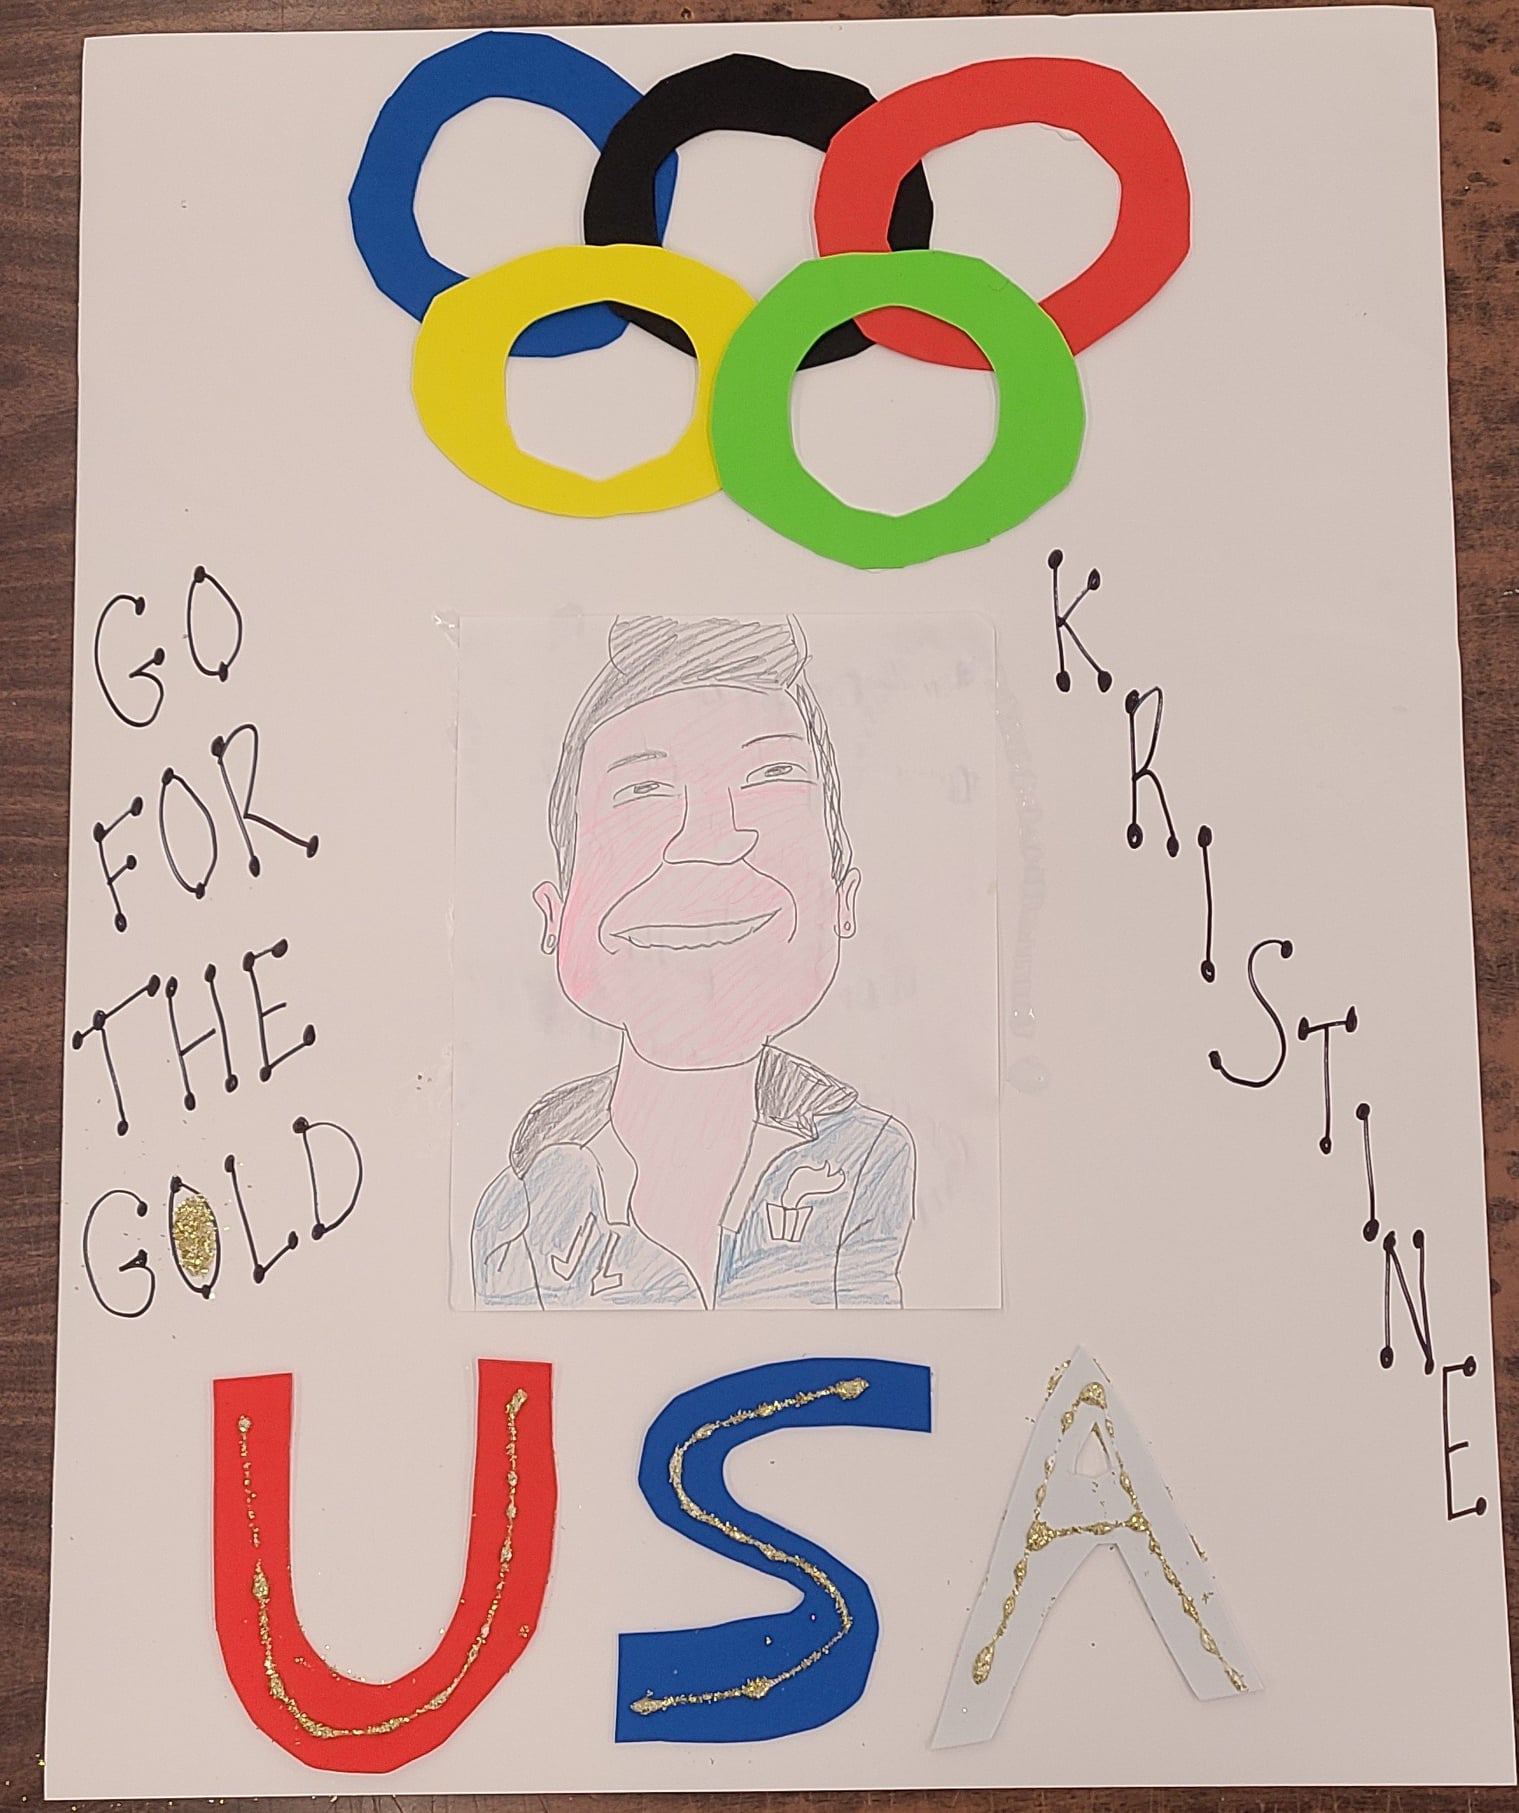 Sign that says "Go for the gold! USA - Kristine!"